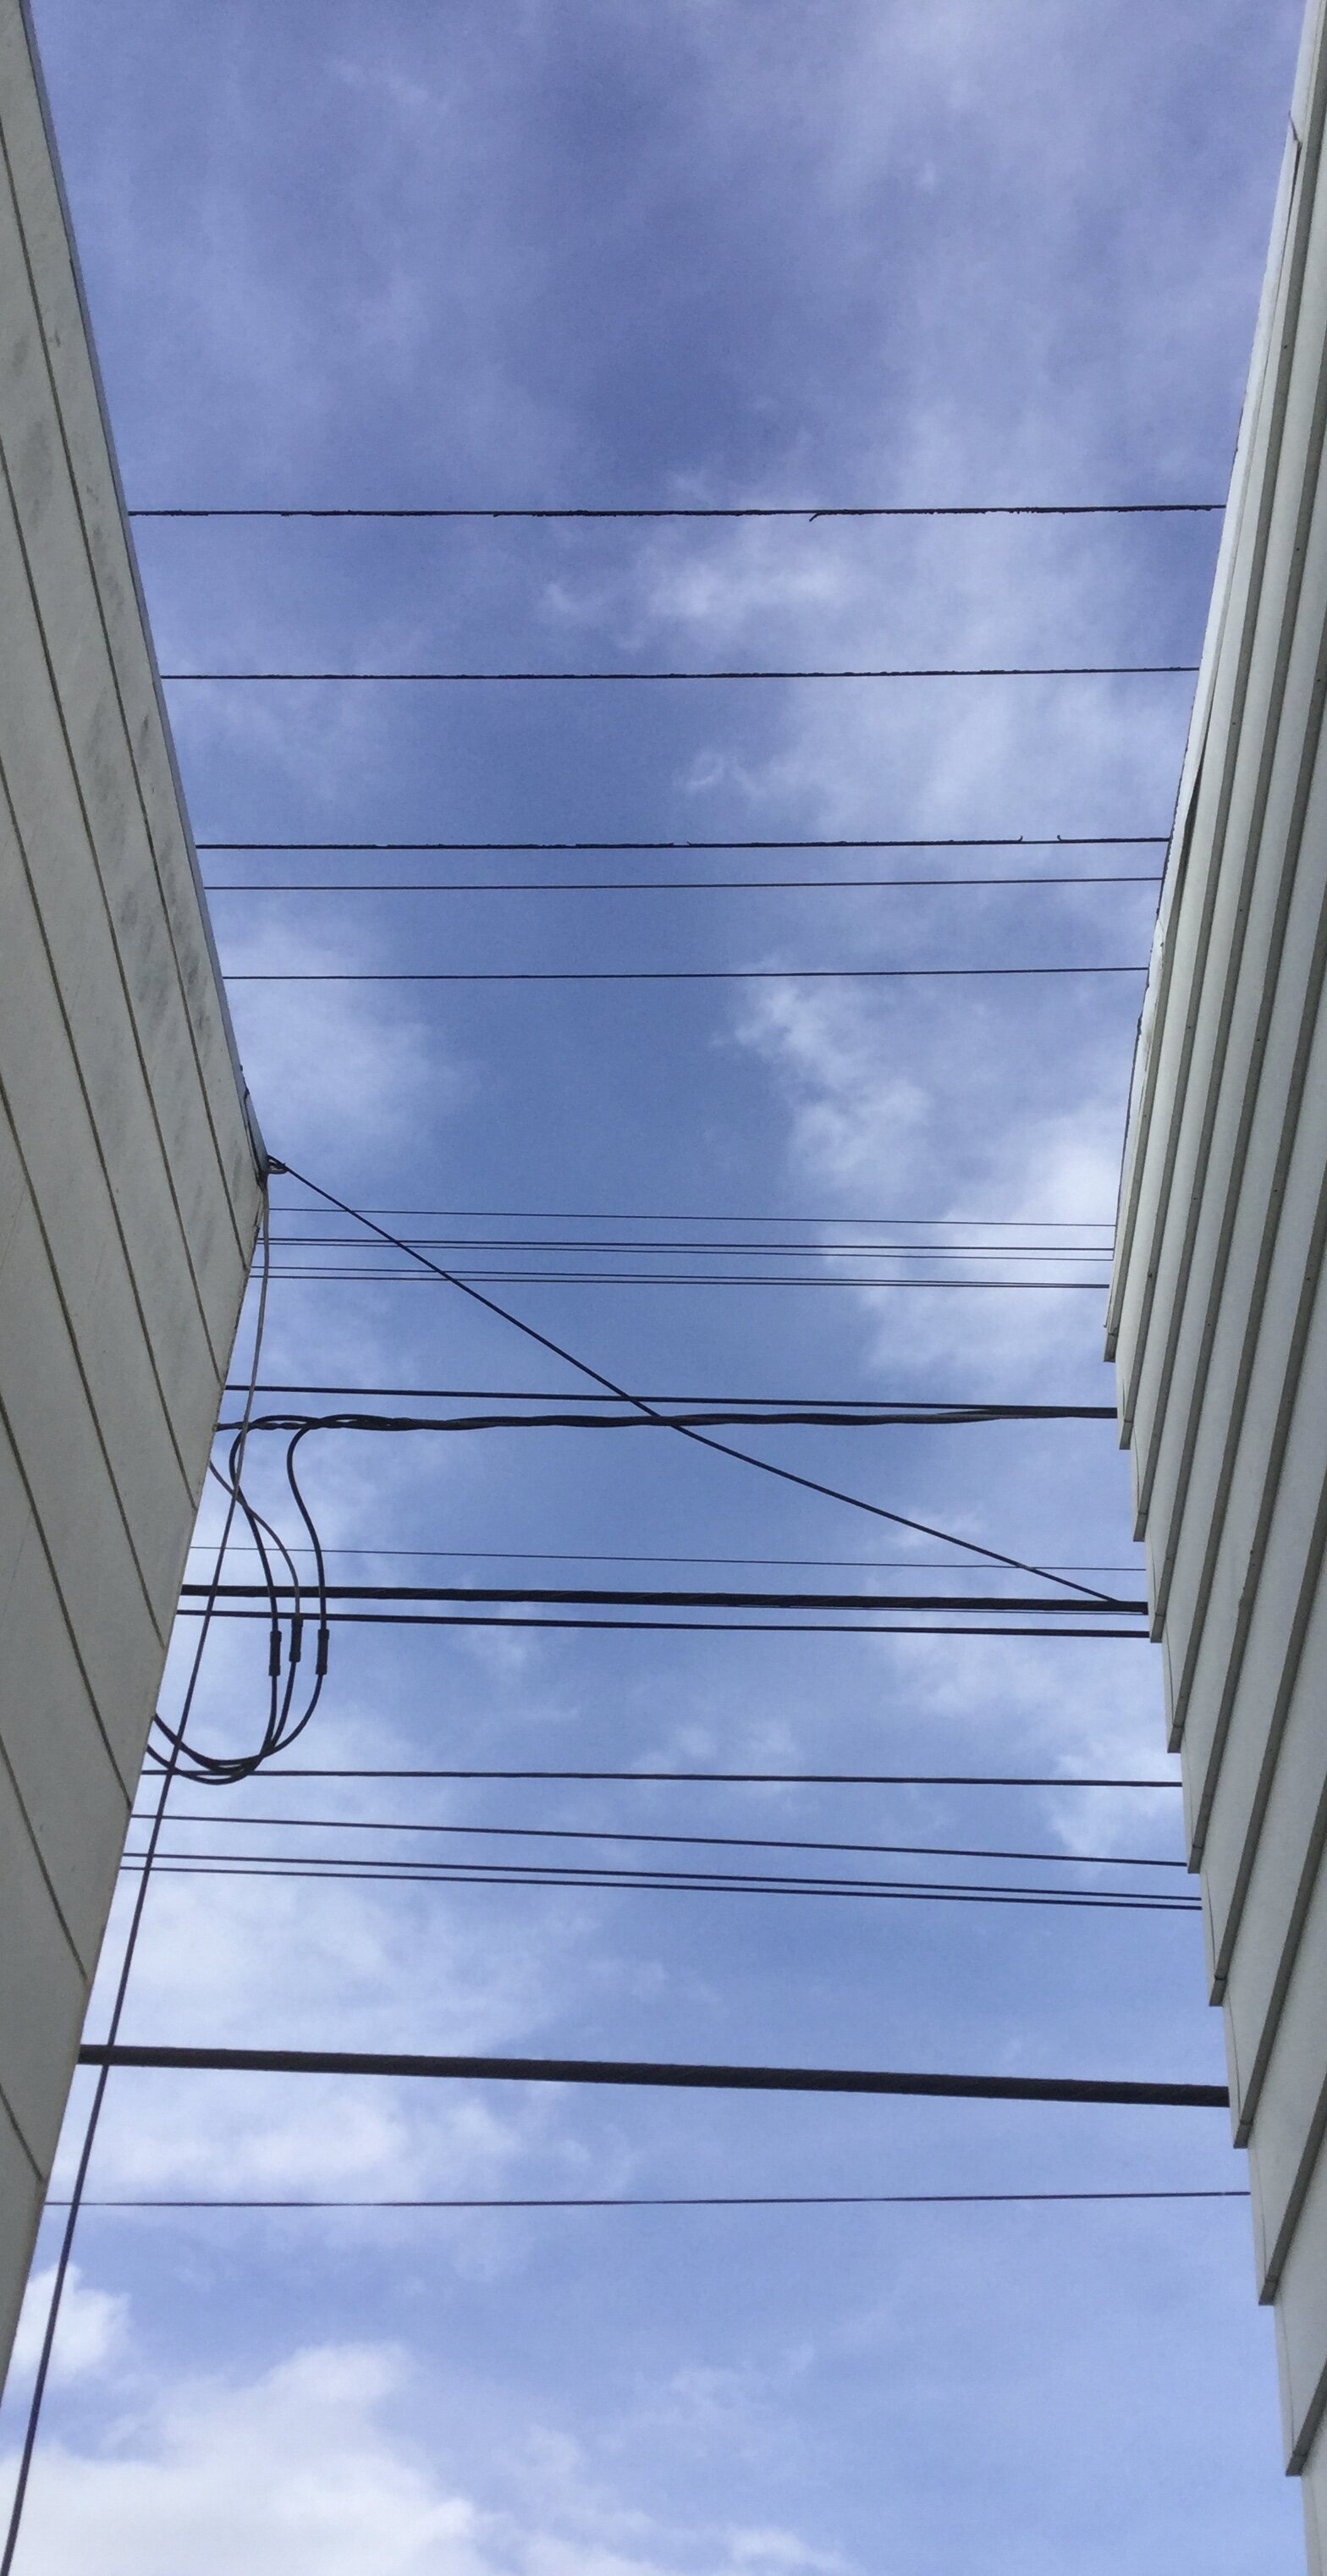 Sky and Wires.jpg